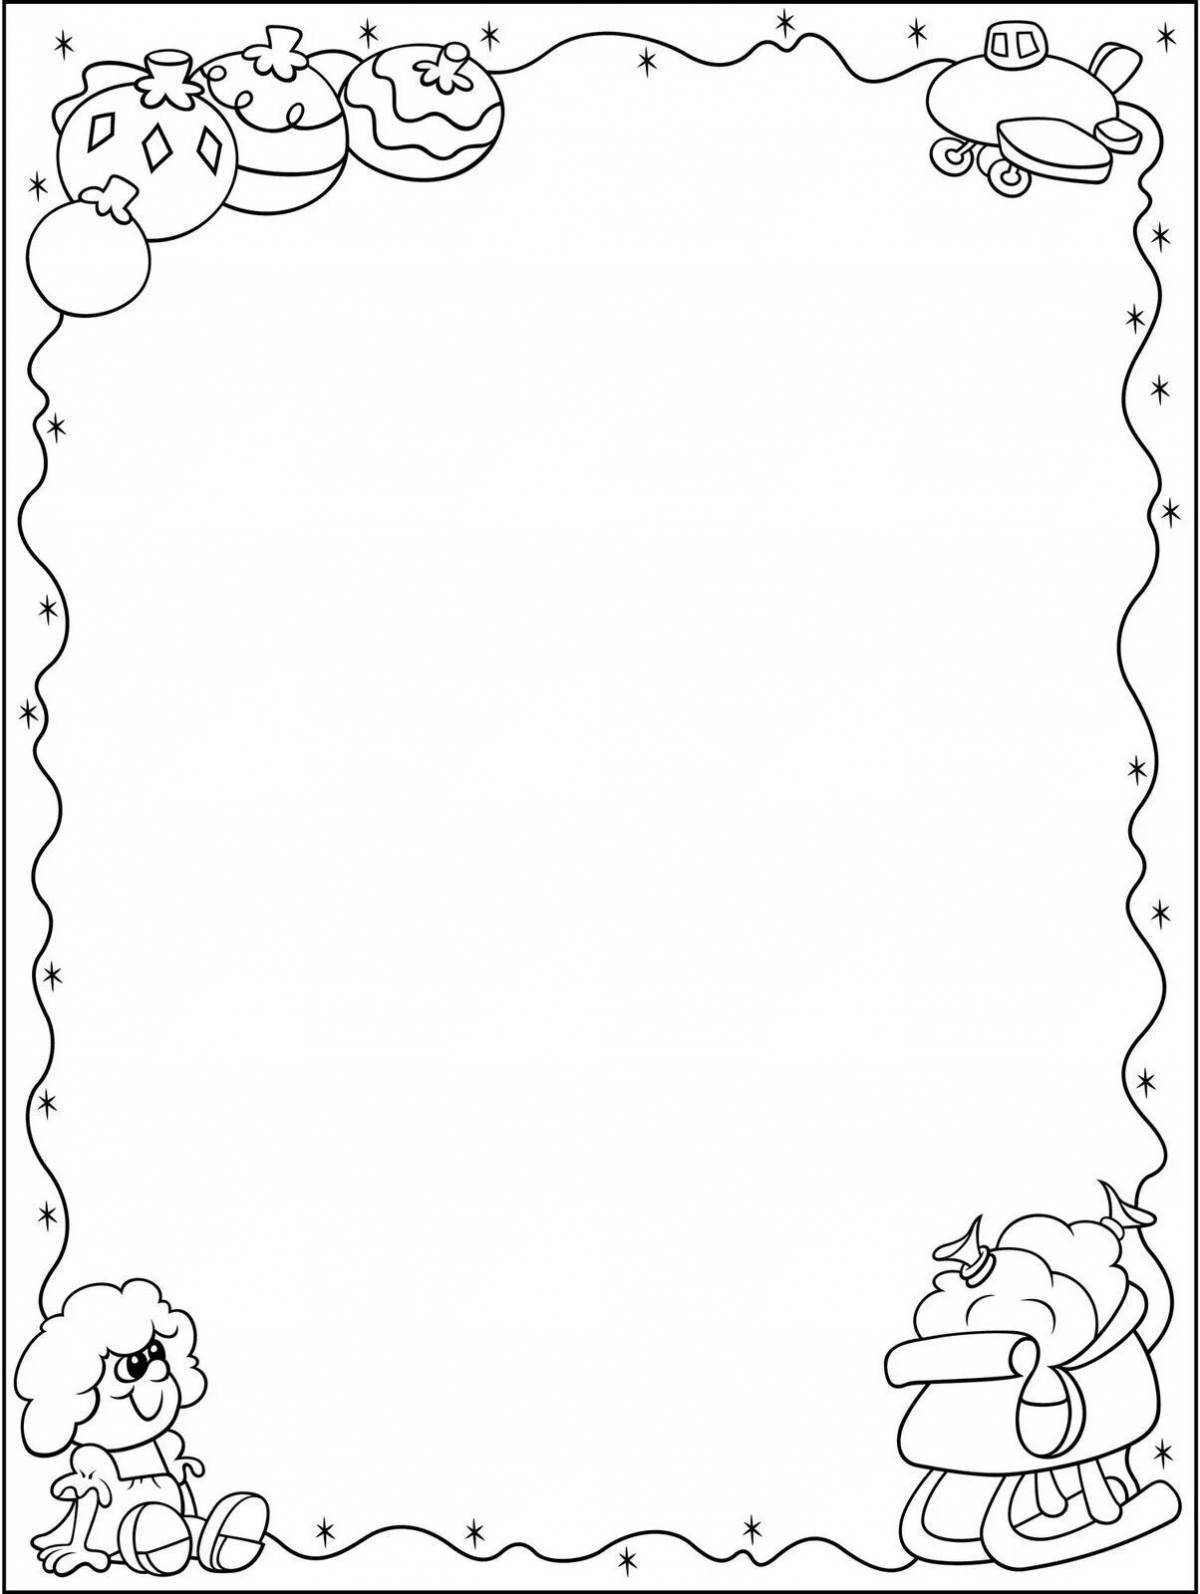 Blissful coloring christmas frame